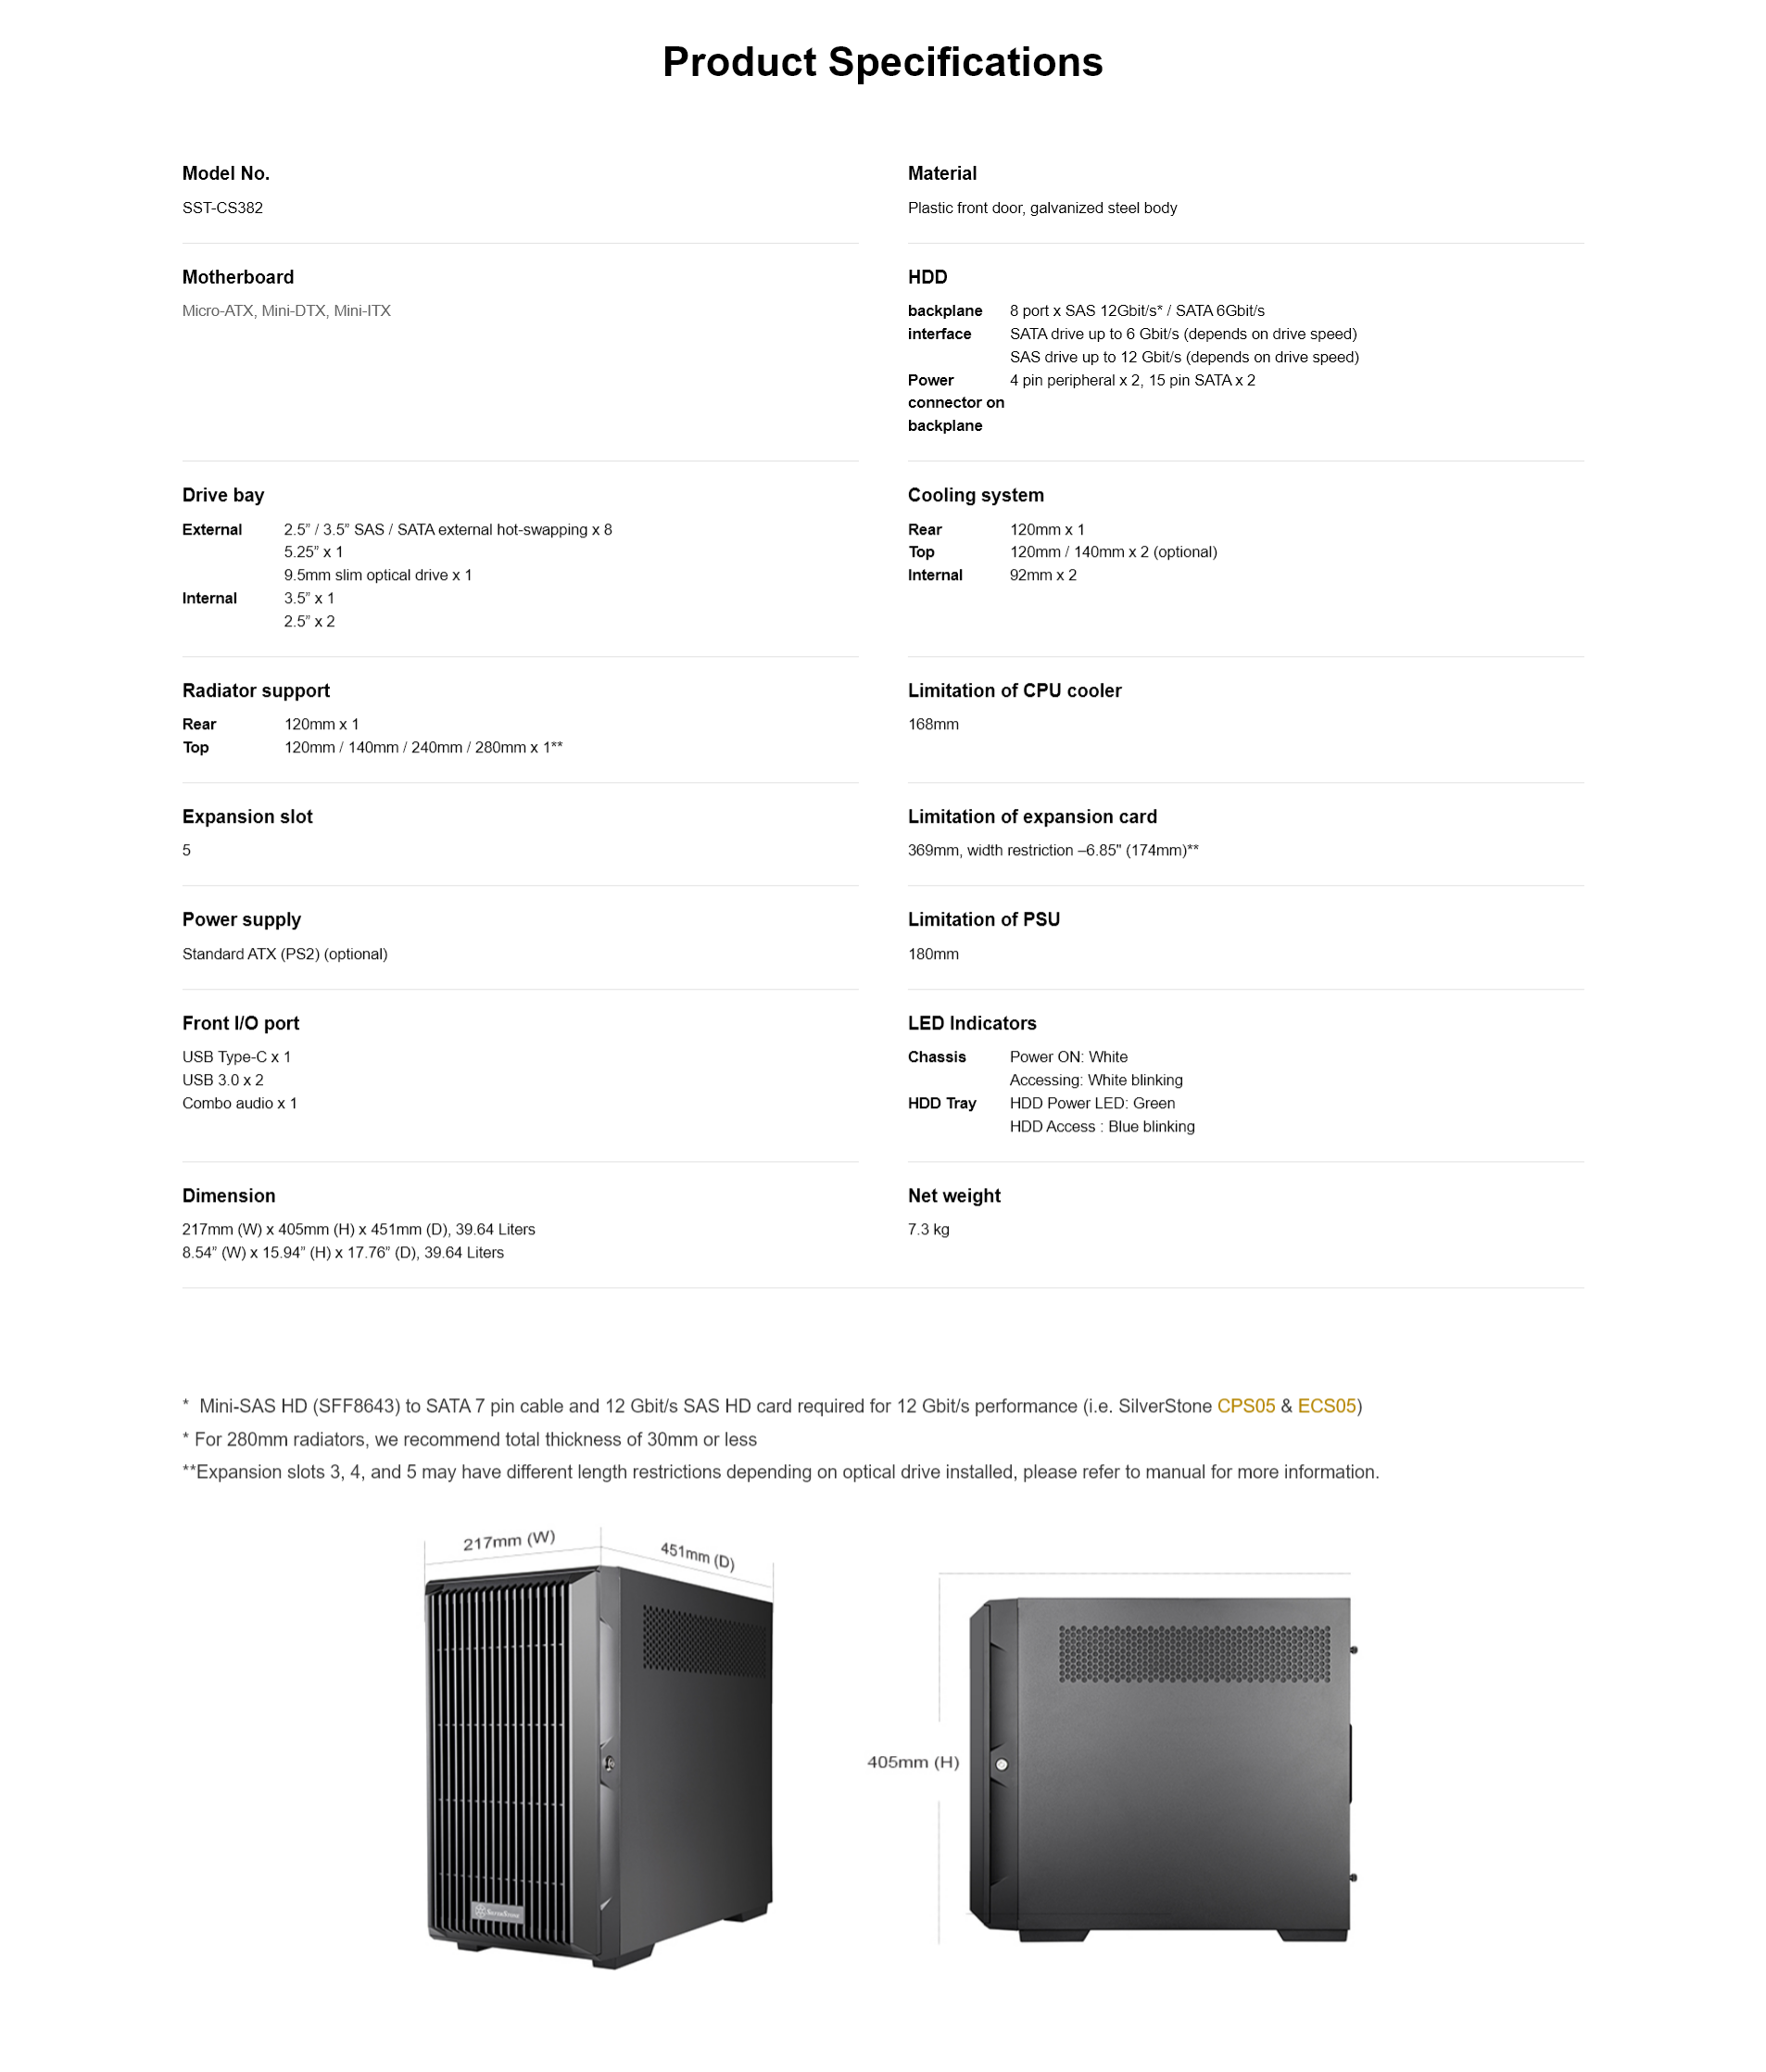 A large marketing image providing additional information about the product Silverstone CS382 NAS Micro ATX Tower Case - Black - Additional alt info not provided